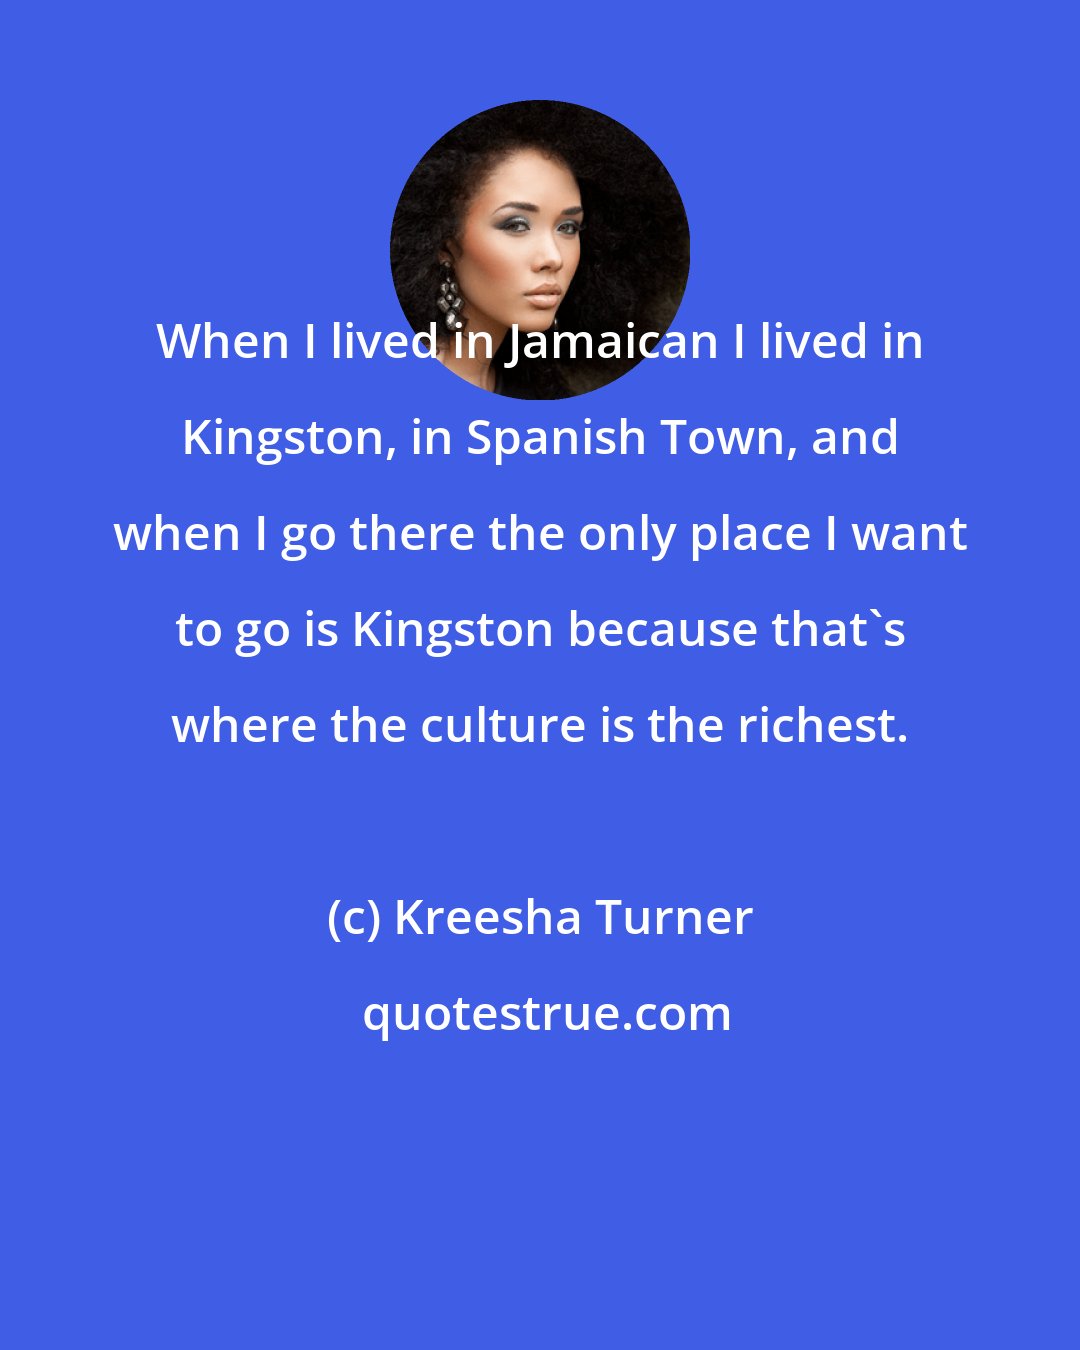 Kreesha Turner: When I lived in Jamaican I lived in Kingston, in Spanish Town, and when I go there the only place I want to go is Kingston because that's where the culture is the richest.